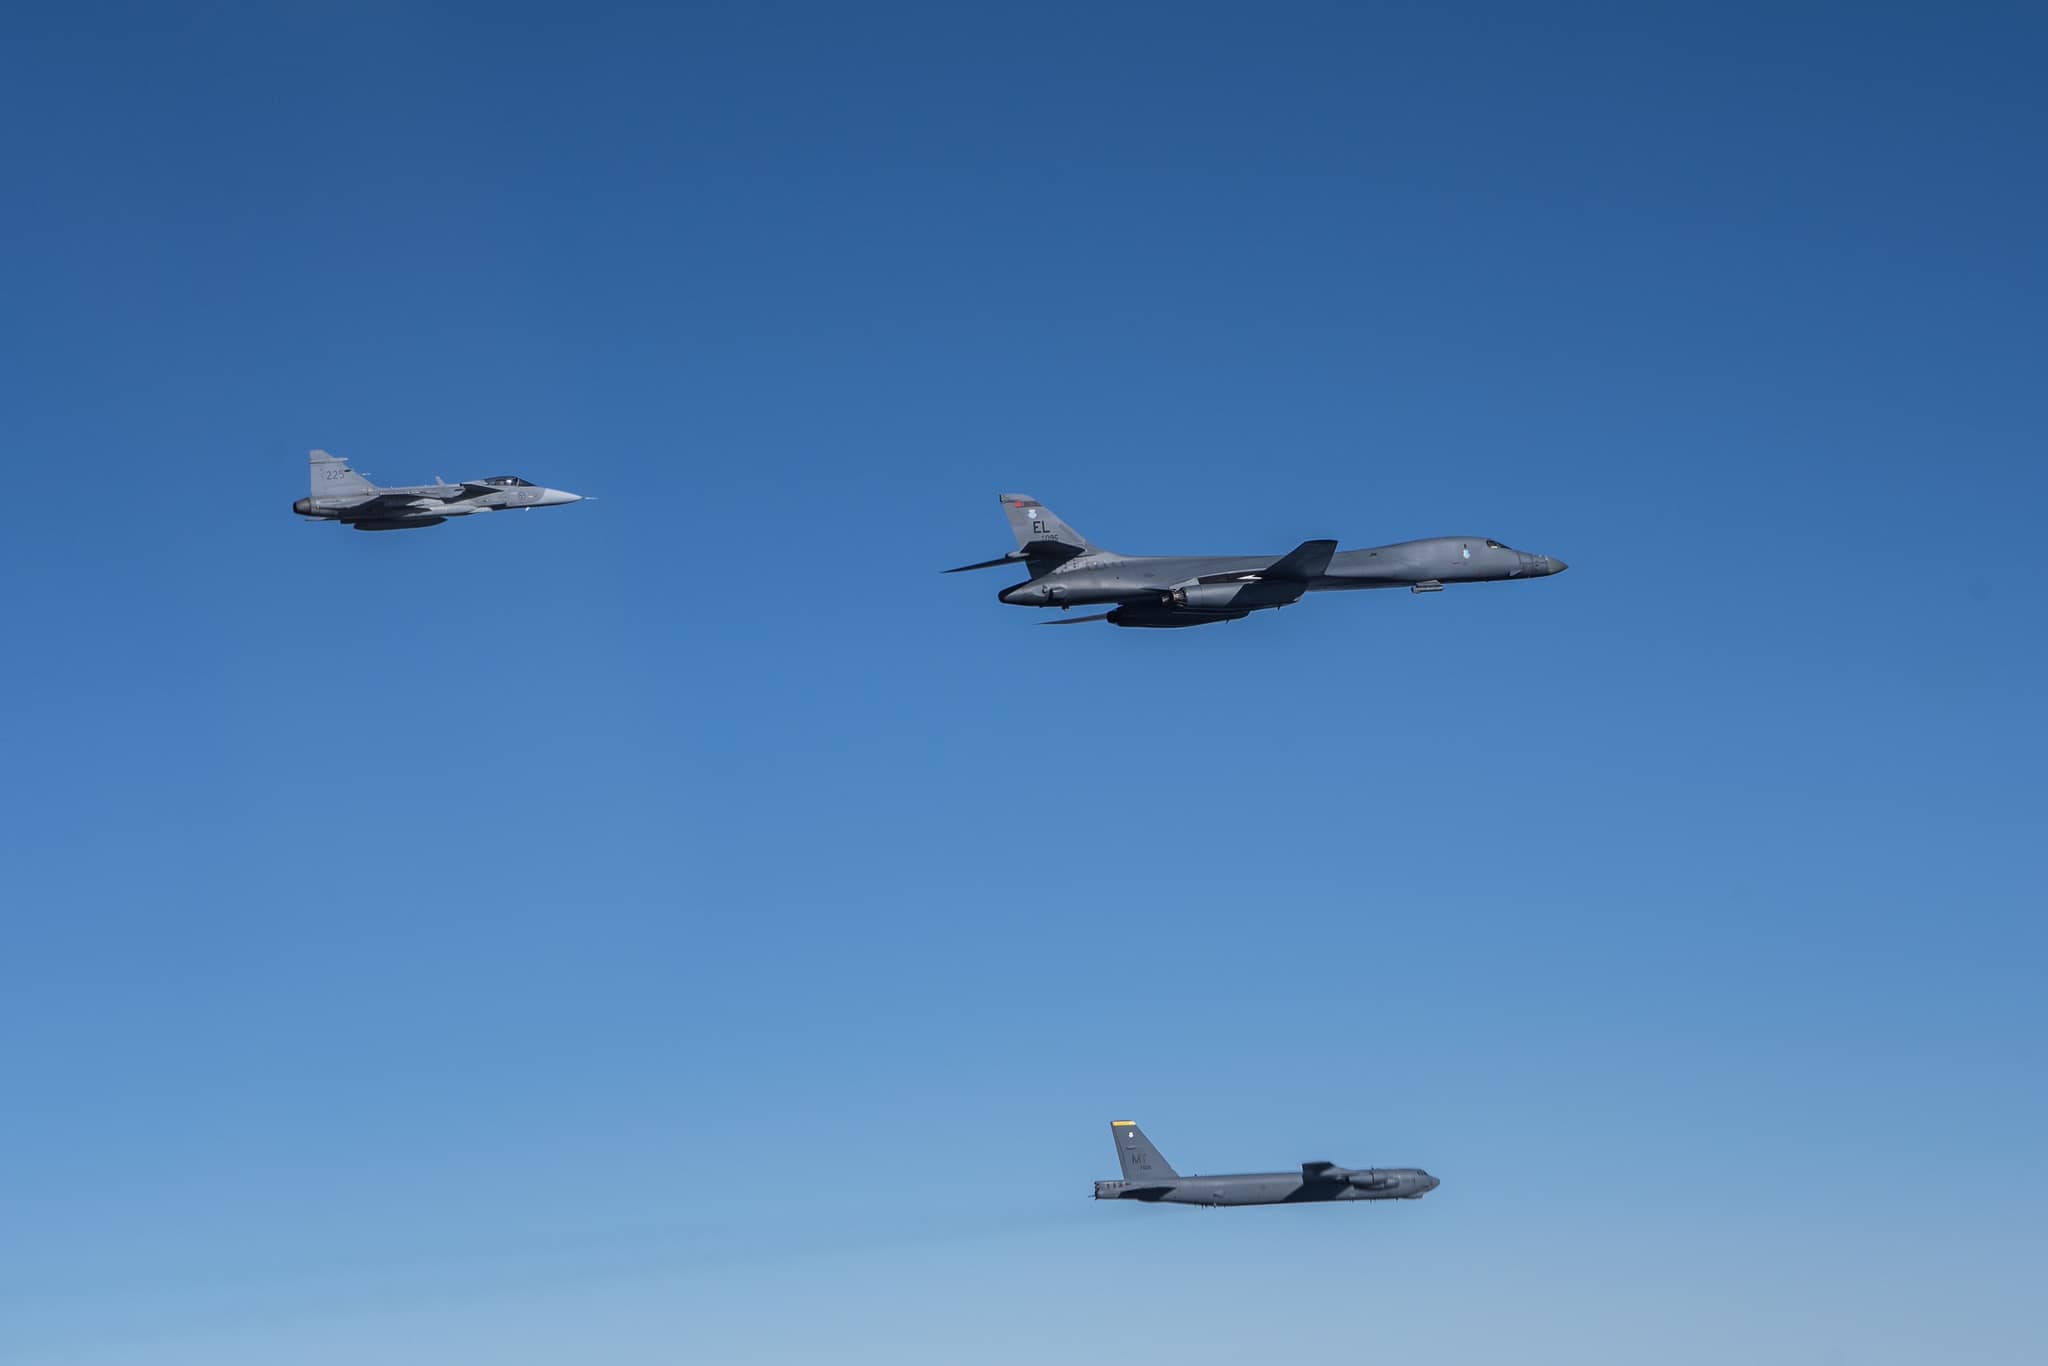 LOOK: B-52 and B-1 Bombers Fly with Gripens over Stockholm